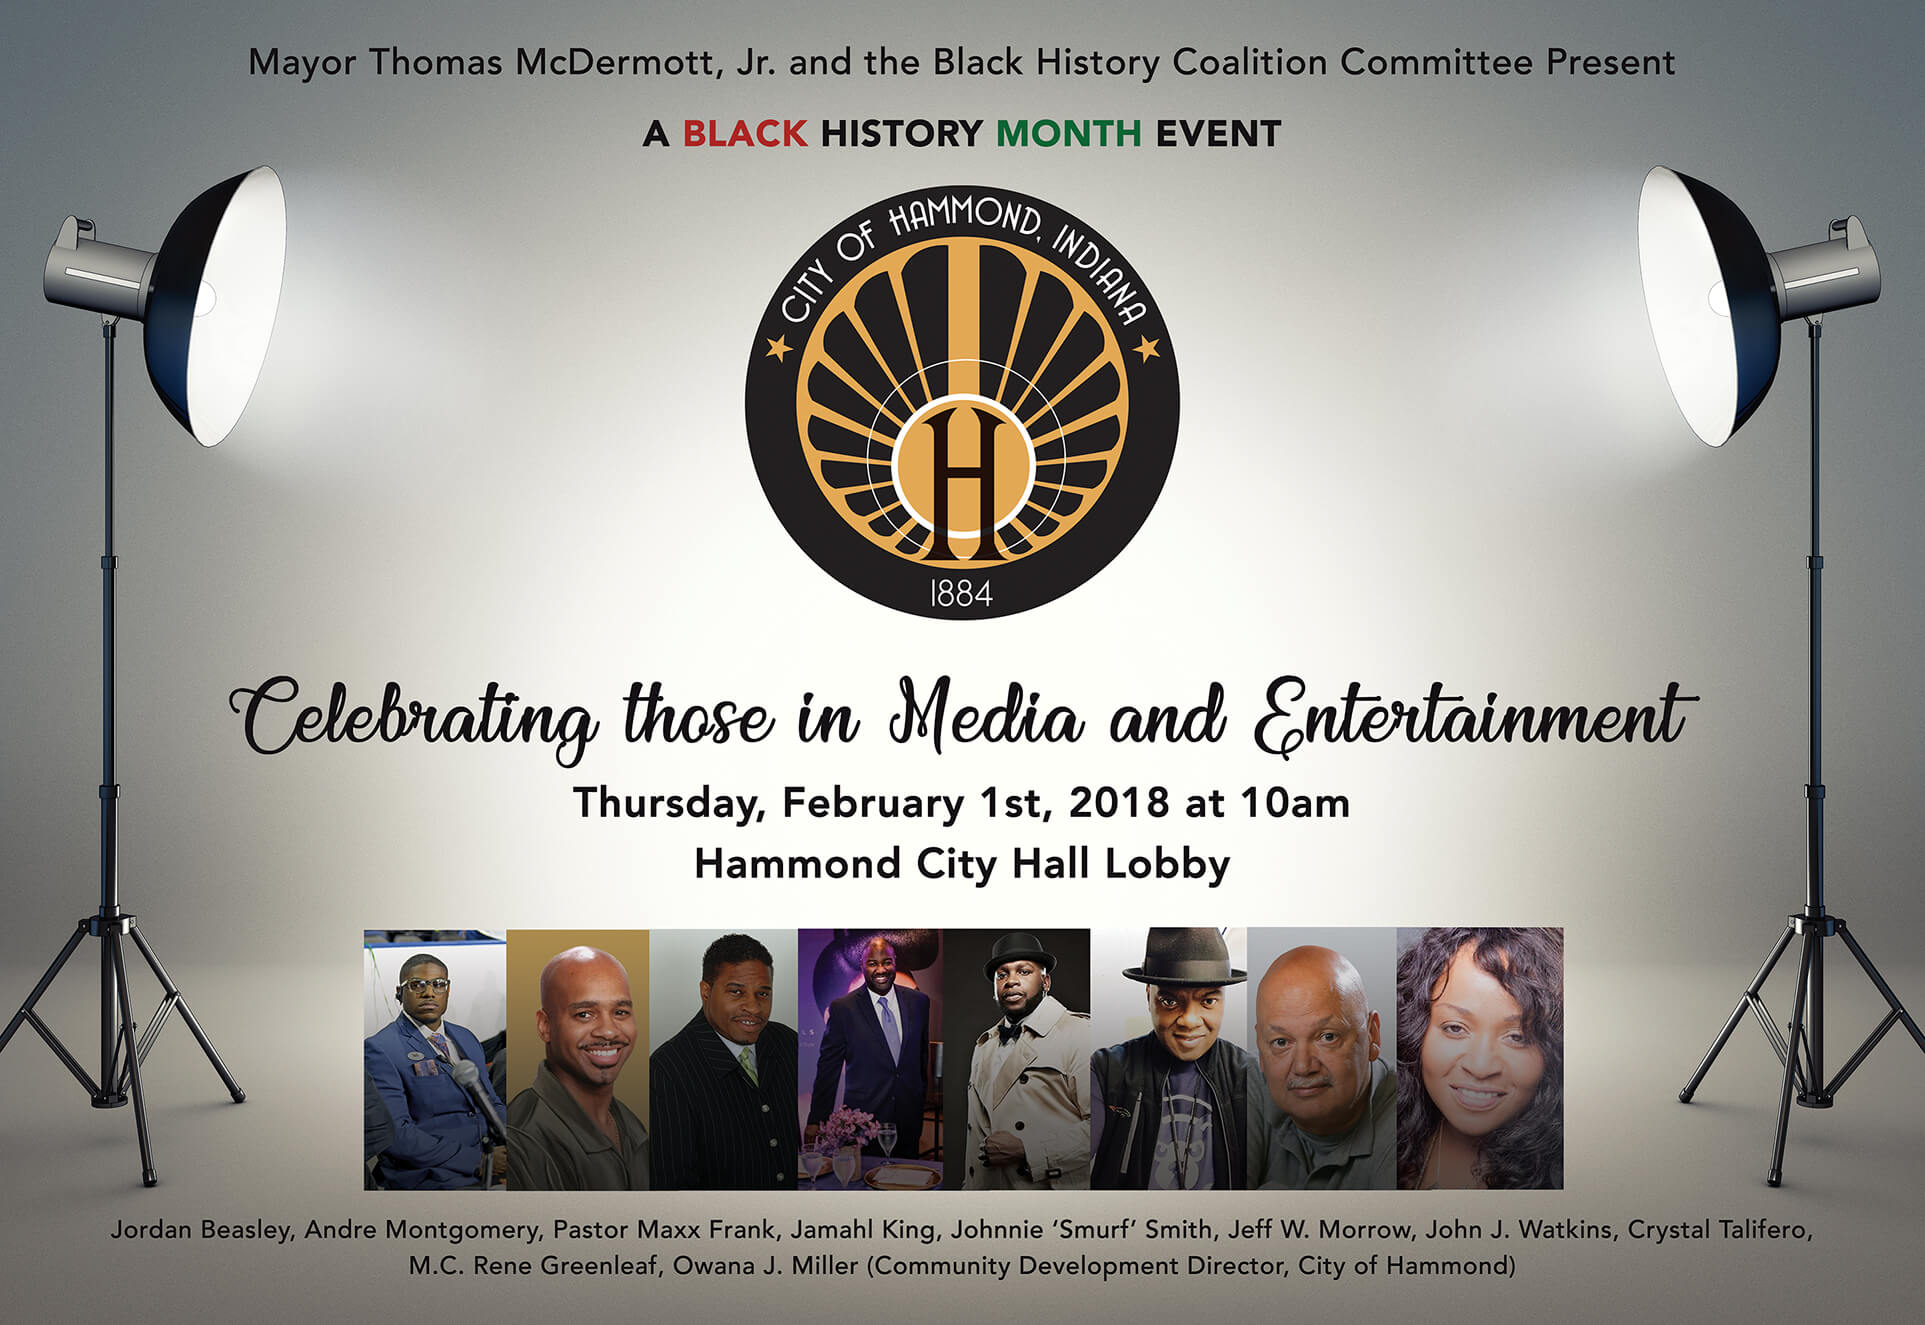 Mayor Thomas M. McDermott, Jr., the Hammond Human Relations Commission and Department of Community Development will host a Black History Month Celebration on Thursday, February 1, 2018 at Hammond City Hall, 1st floor lobby. The festivities will begin at 10:00 a.m.  The theme for this year’s event is “Celebrating those in Media and Entertainment”.